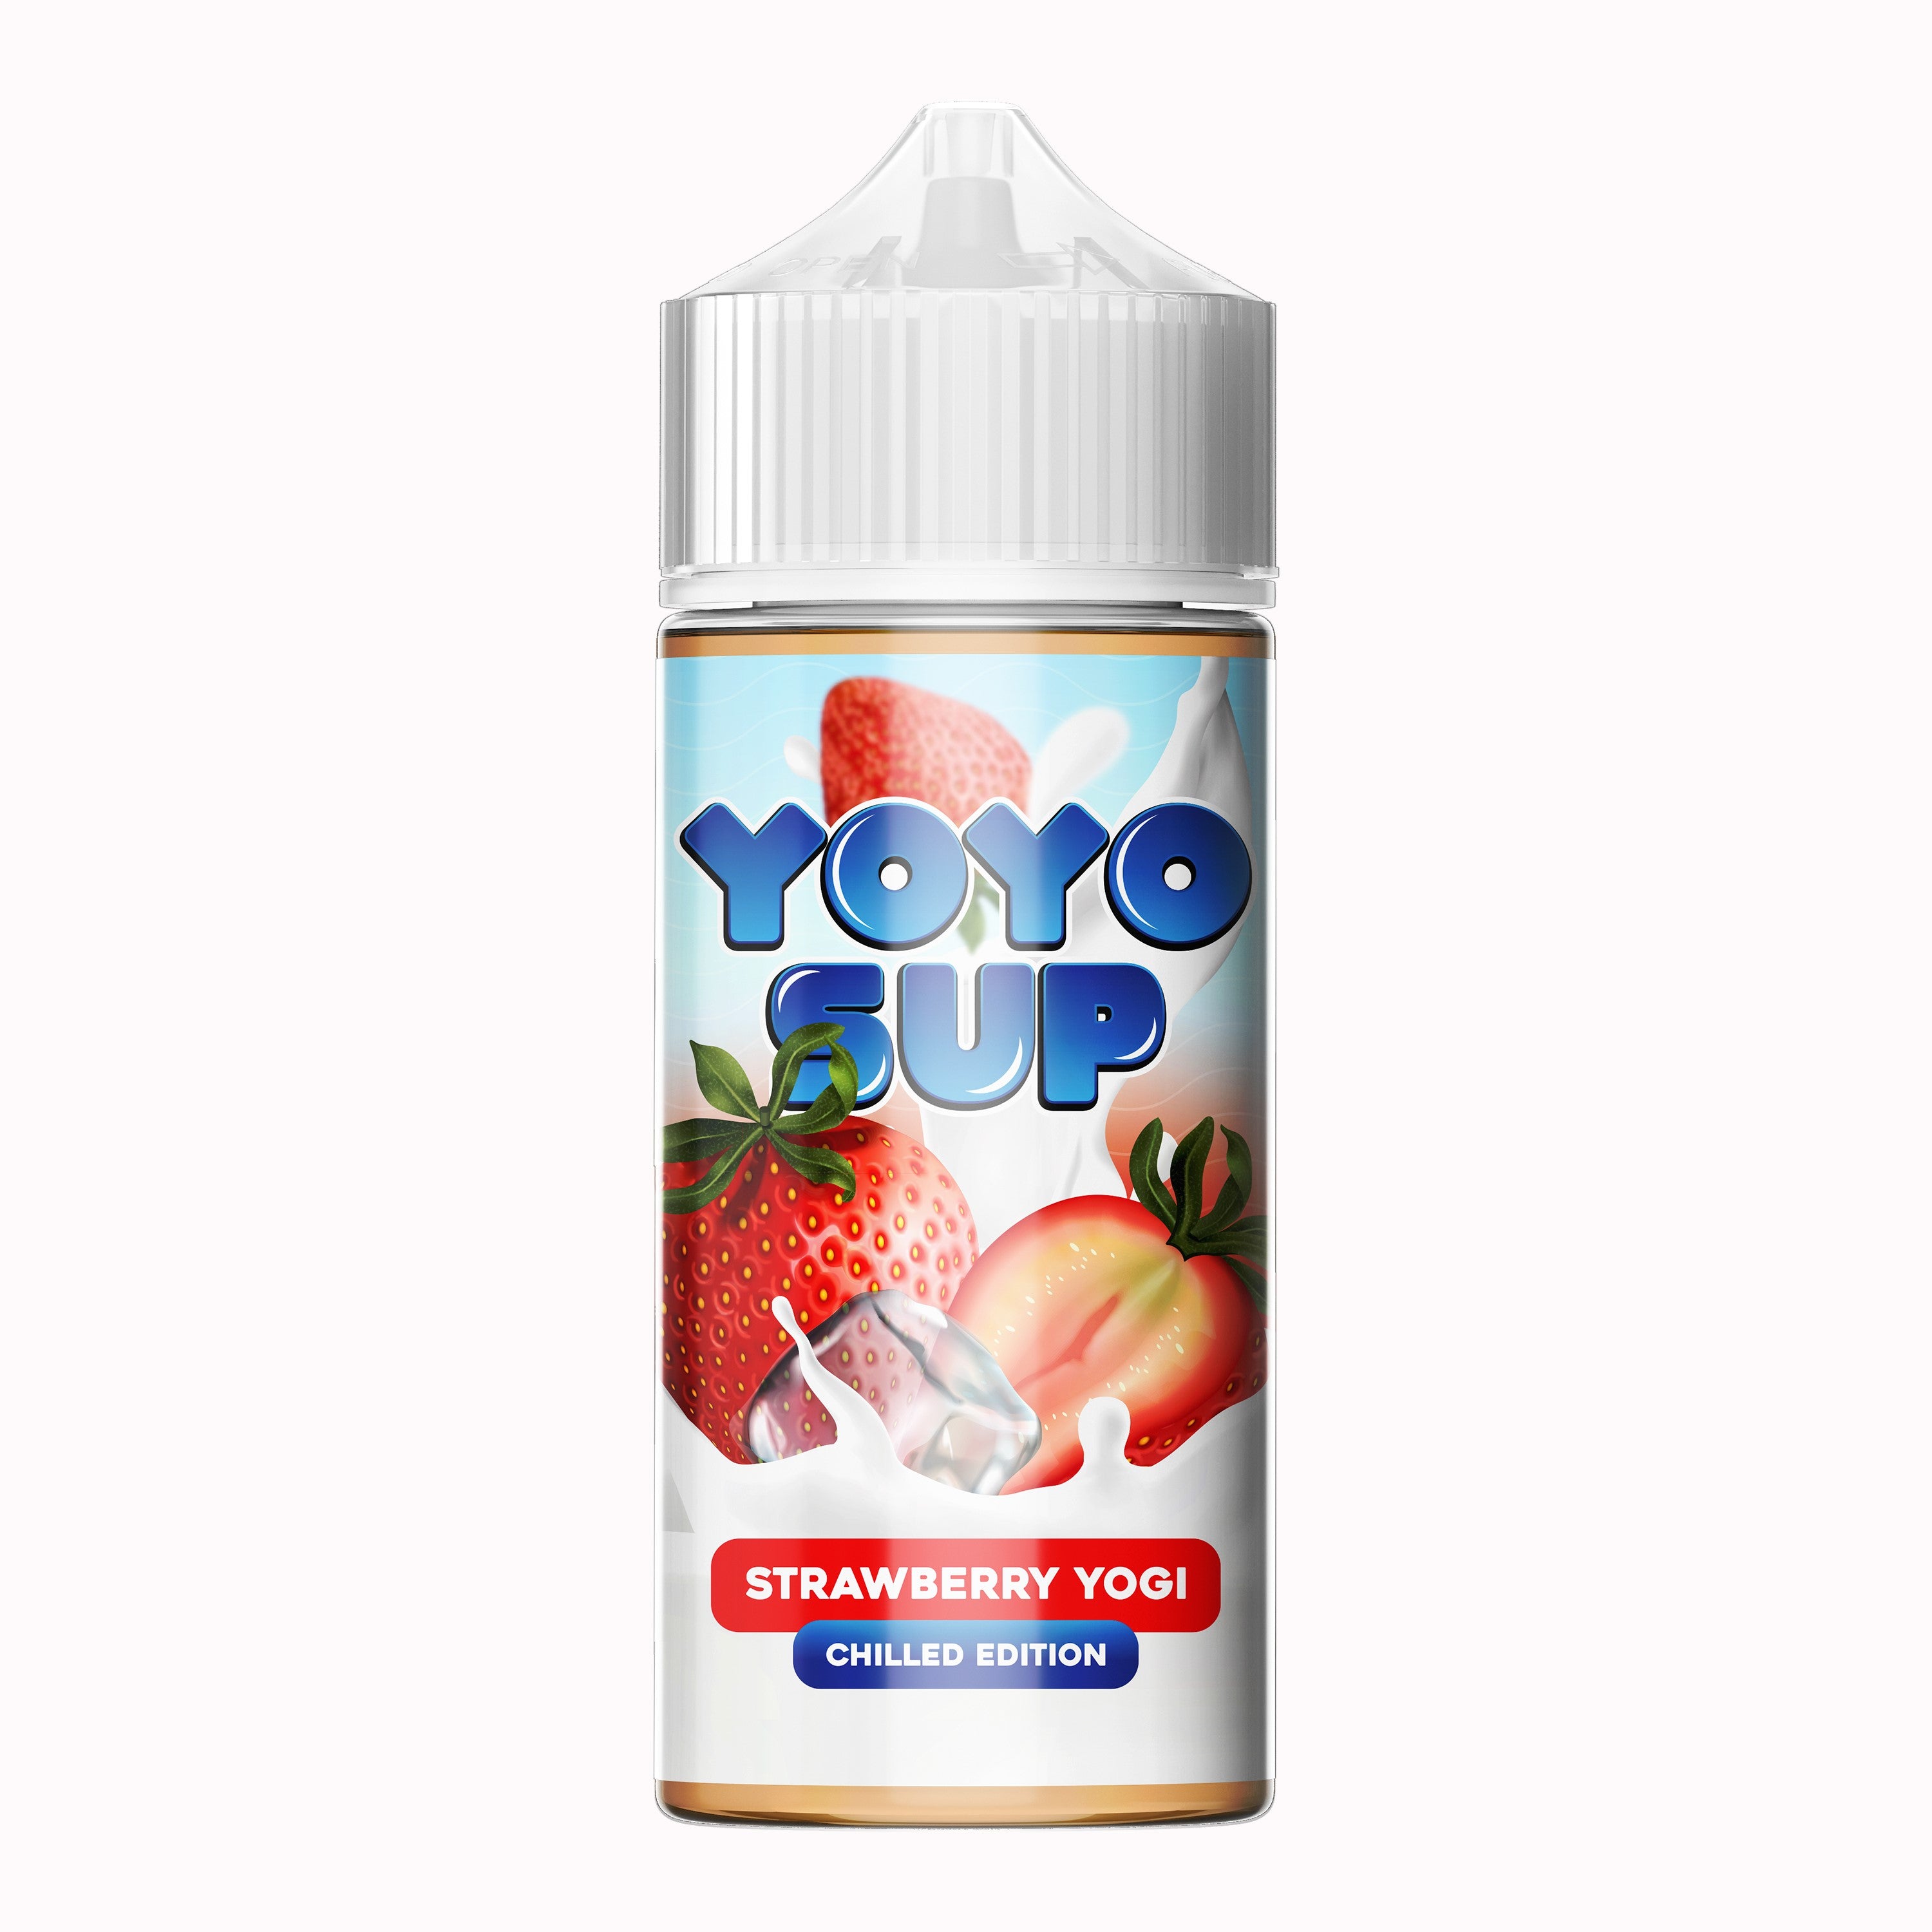 Yoyo Sup | Chilled Strawberry by Null E-Liquid 120ml